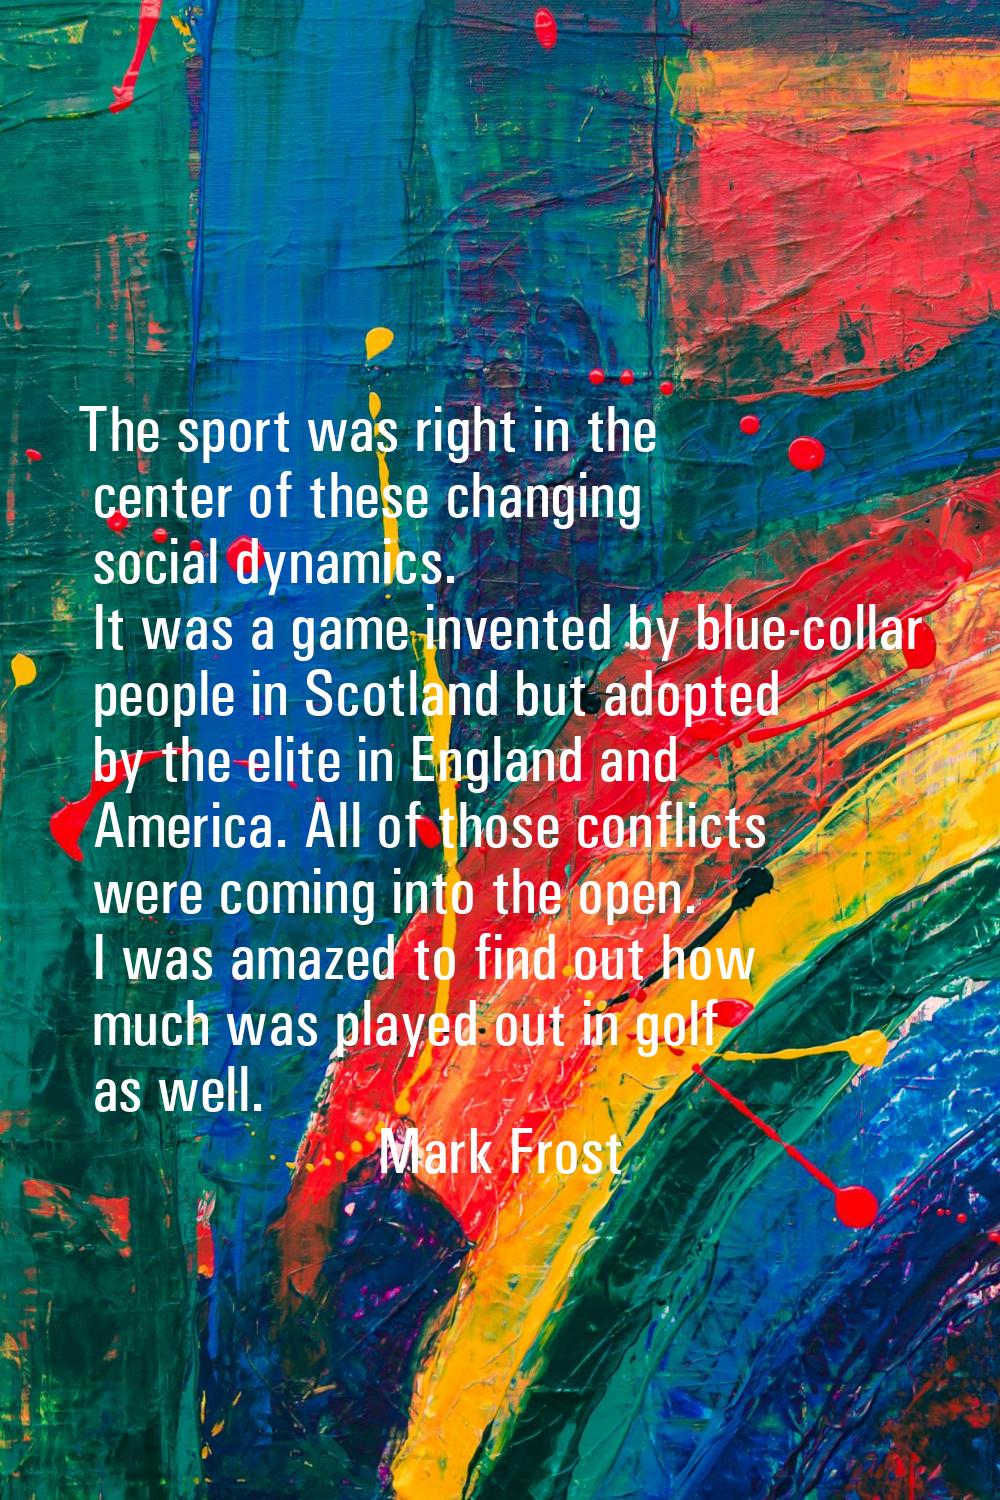 The sport was right in the center of these changing social dynamics. It was a game invented by blue